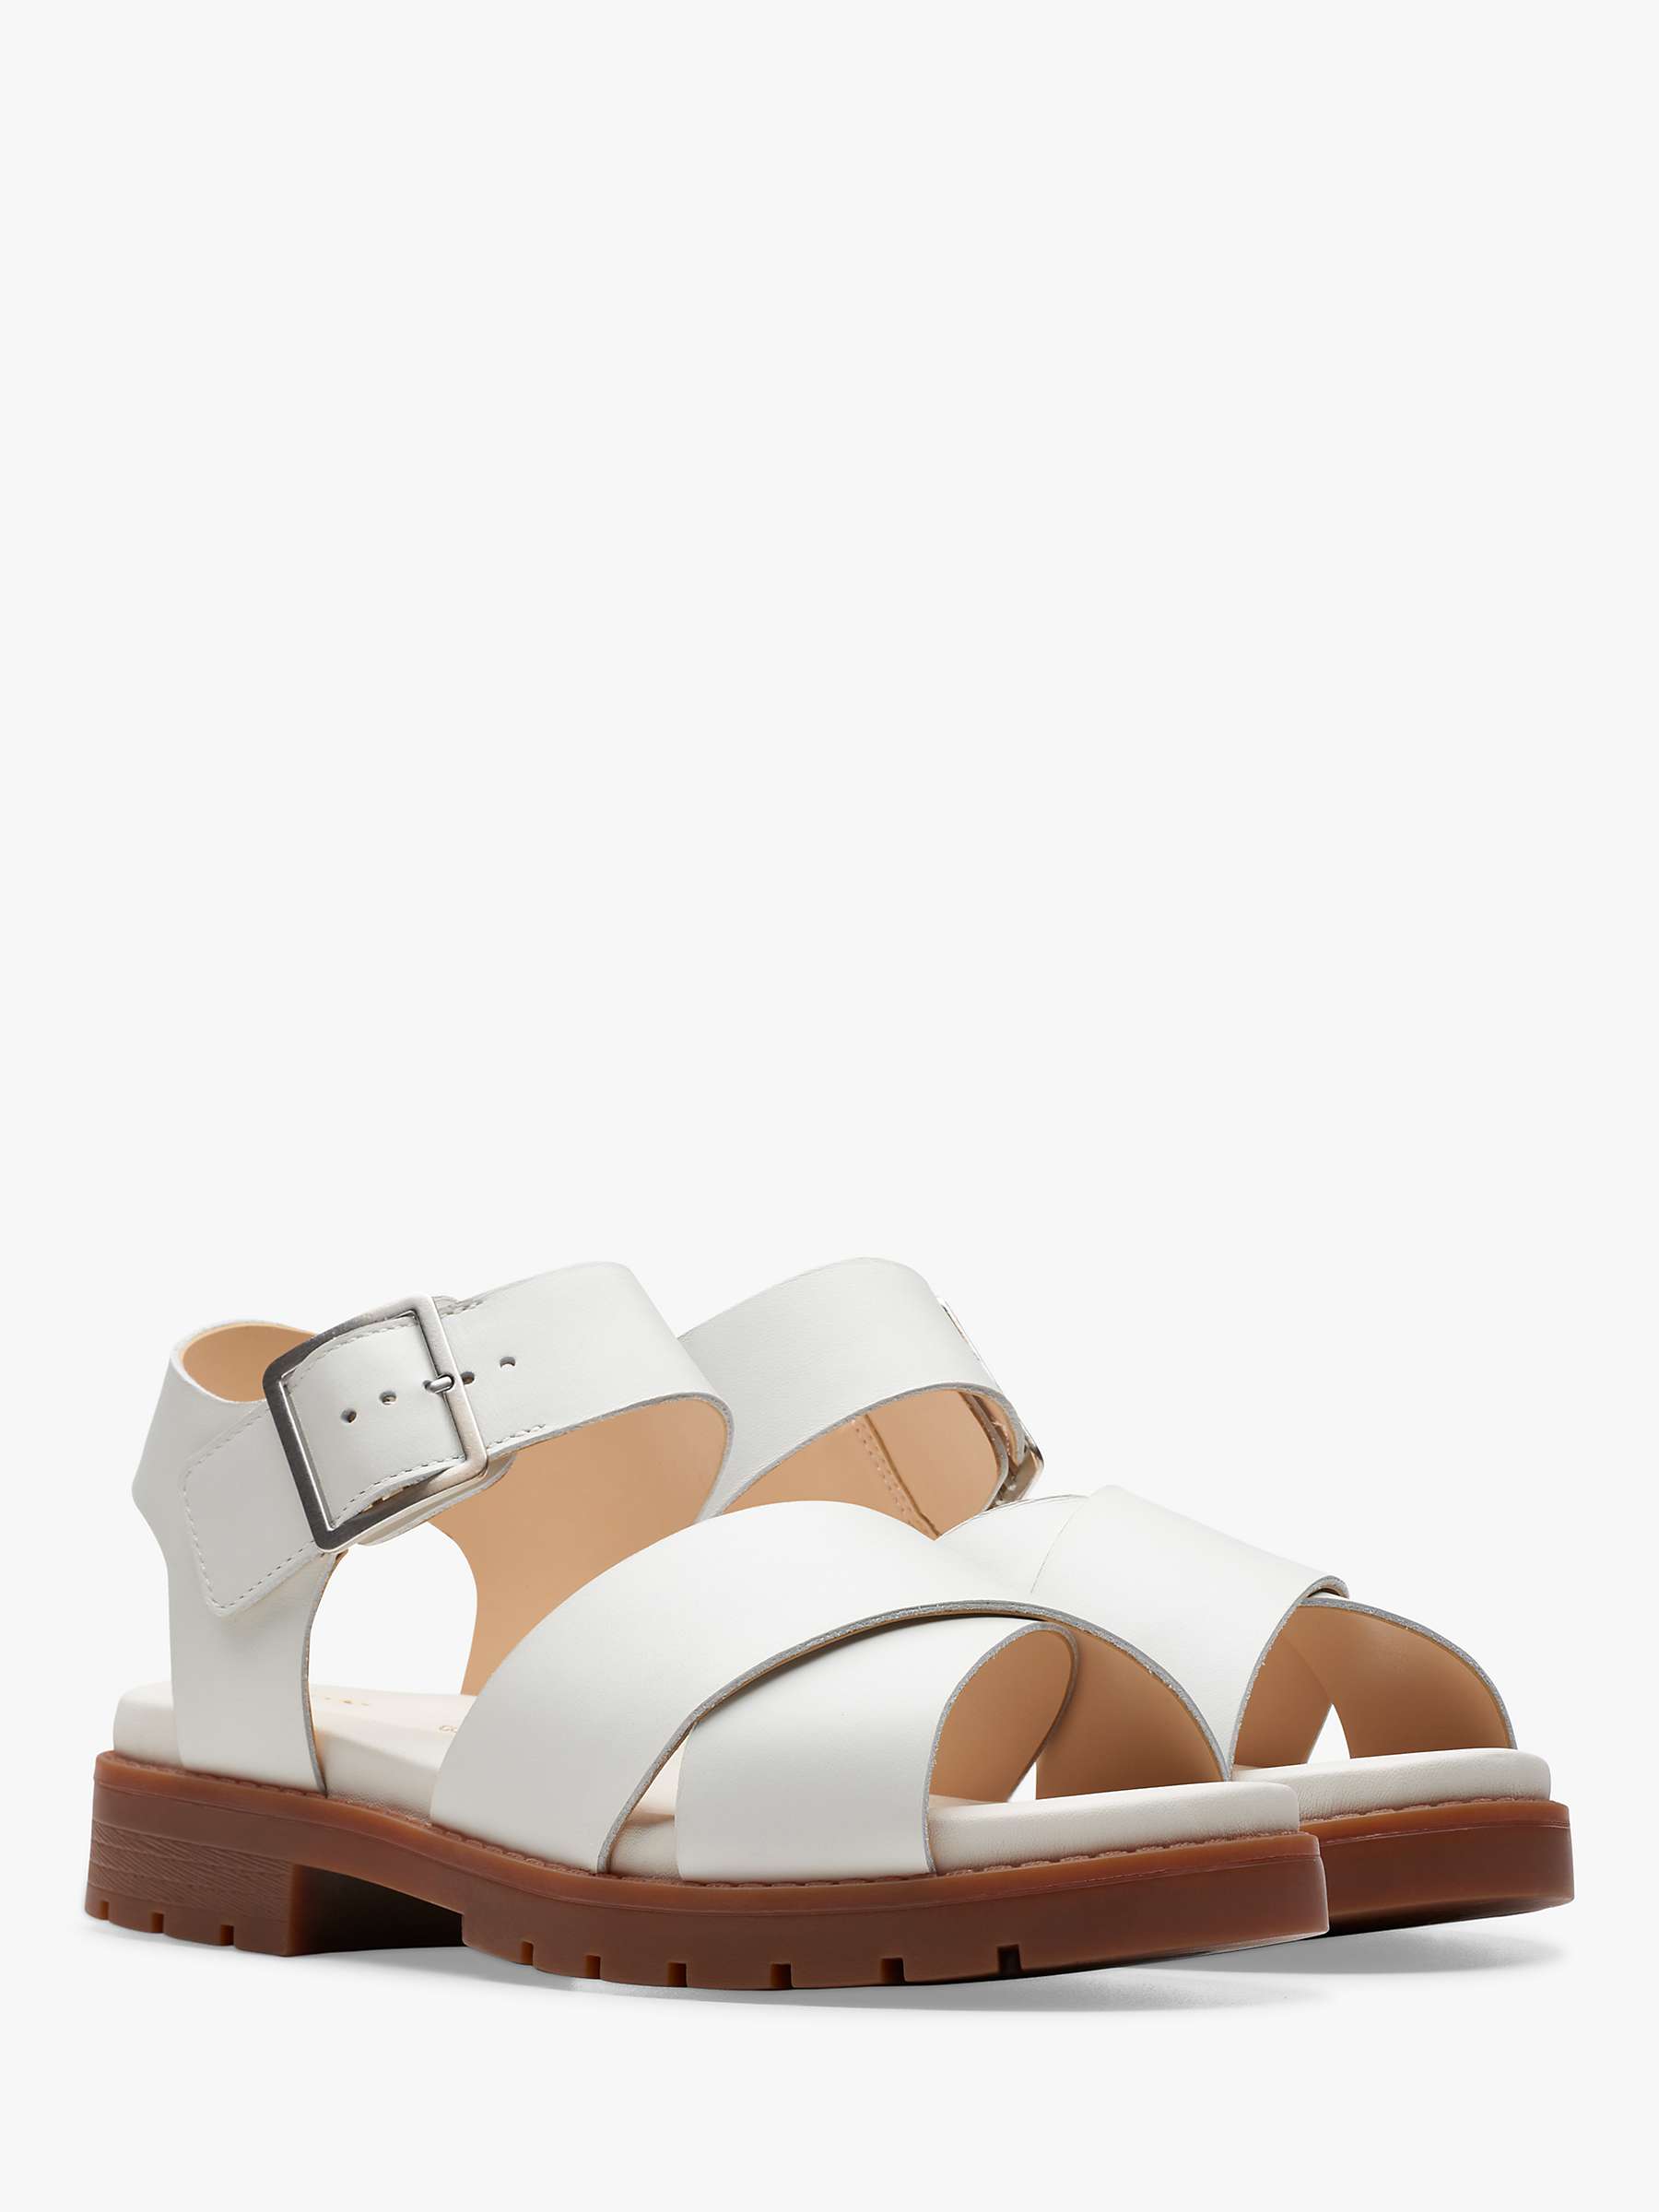 Buy Clarks Orinocco Leather Cross Strap Sandals, Off White Online at johnlewis.com